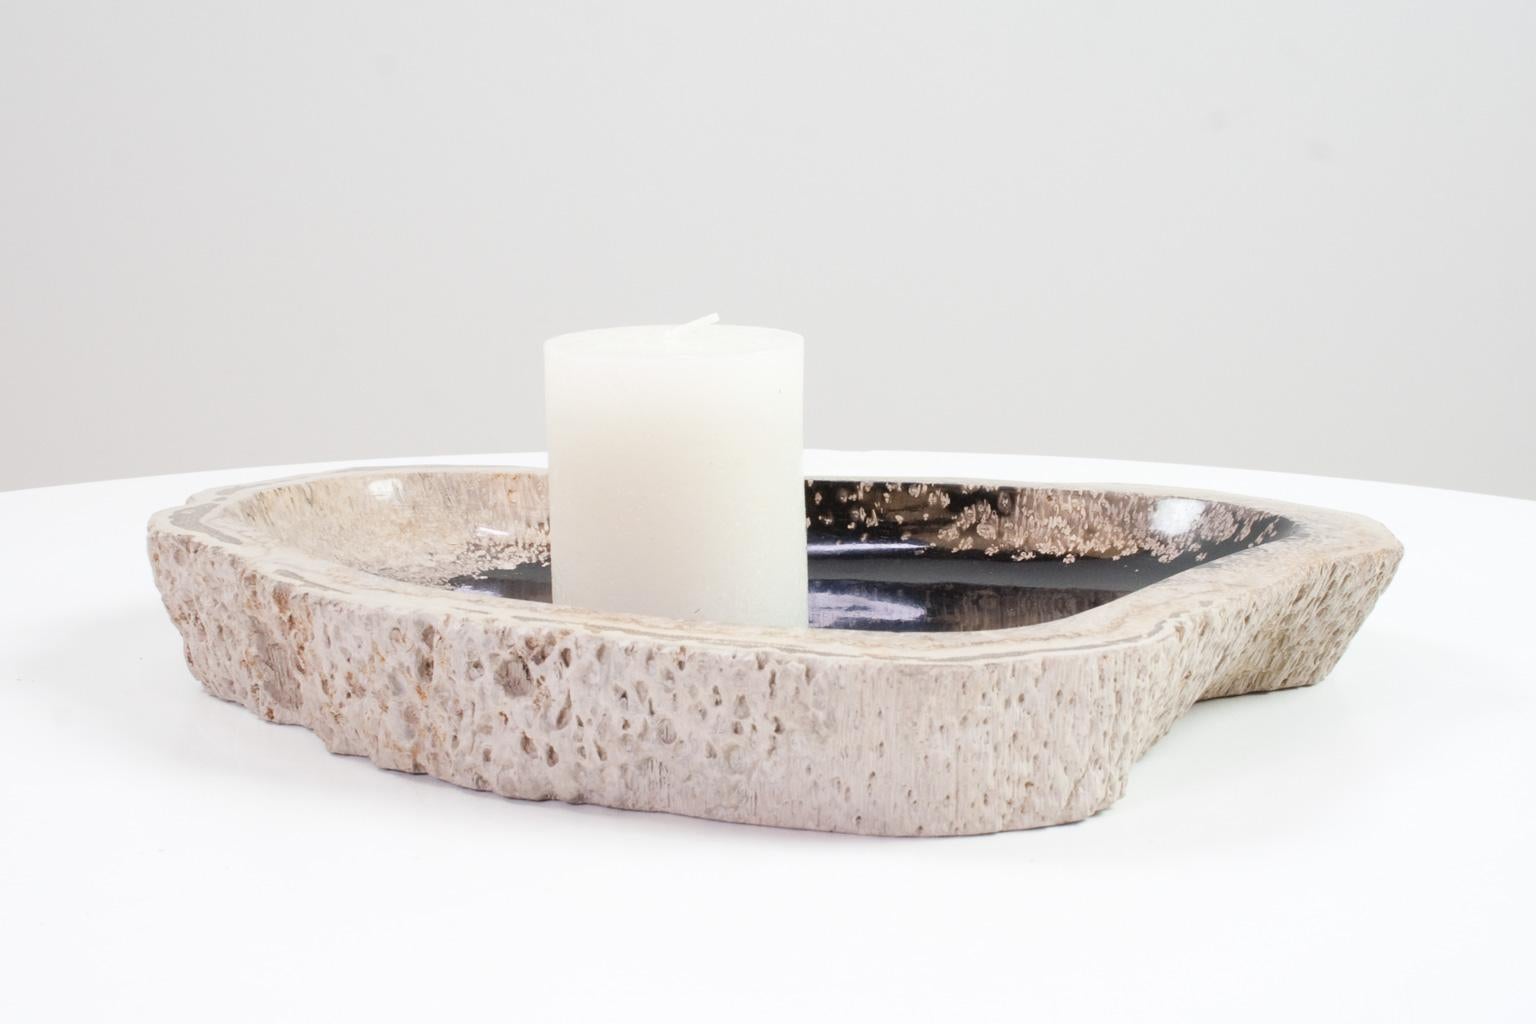 18th Century and Earlier Petrified Wooden Bowl or Platter, Home Accessory of Organic Original